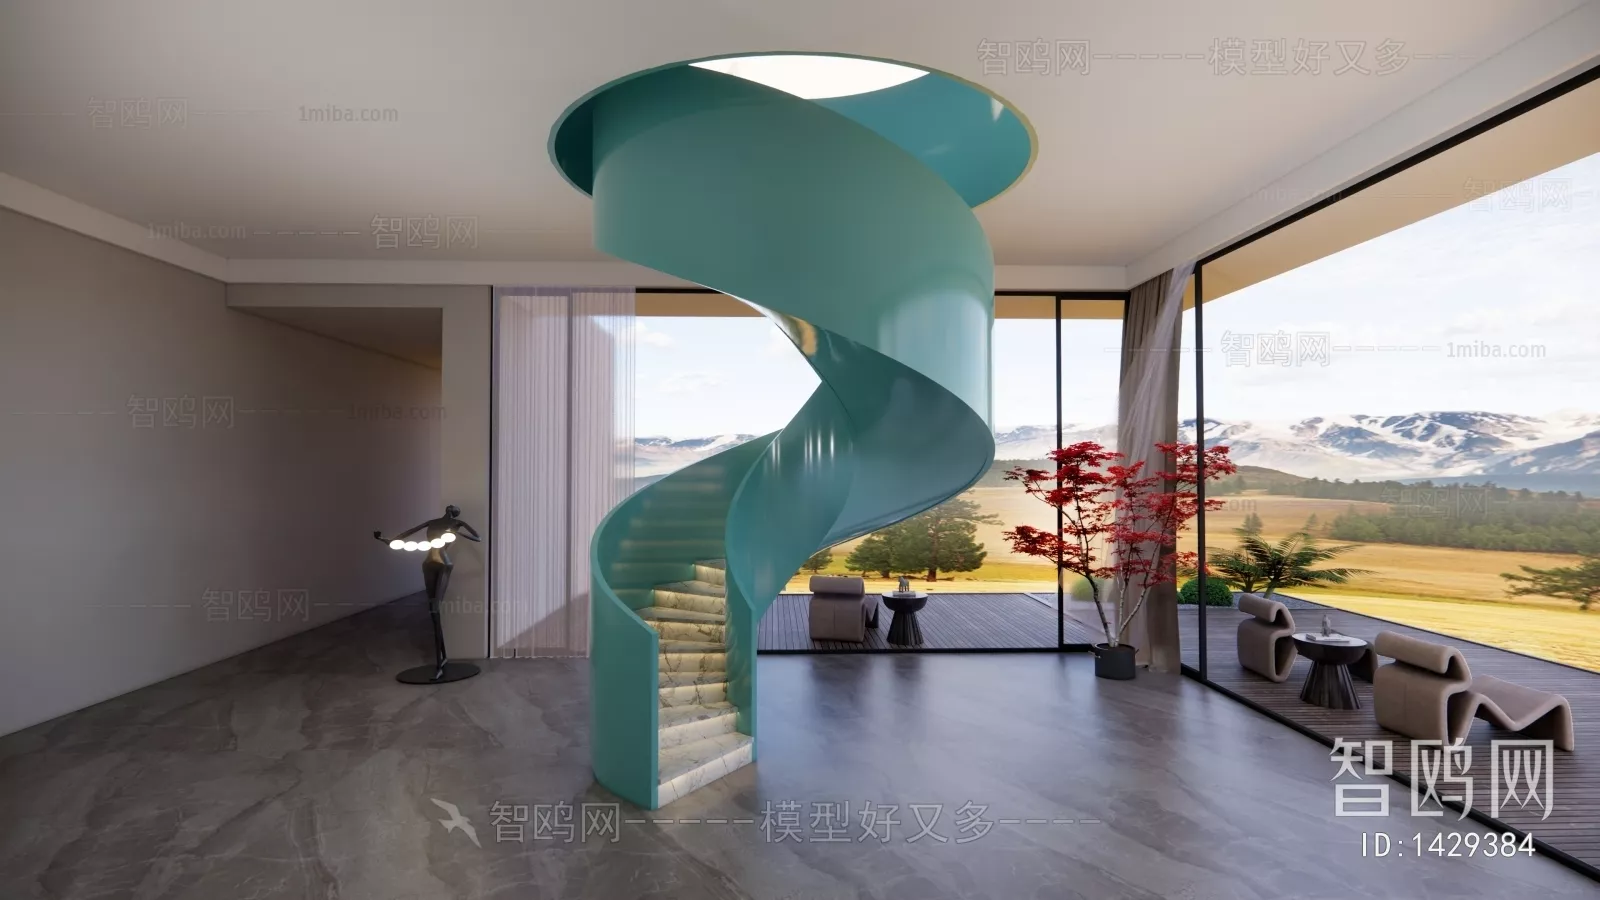 MODERN STAIR - SKETCHUP 3D MODEL - VRAY OR ENSCAPE - ID14318